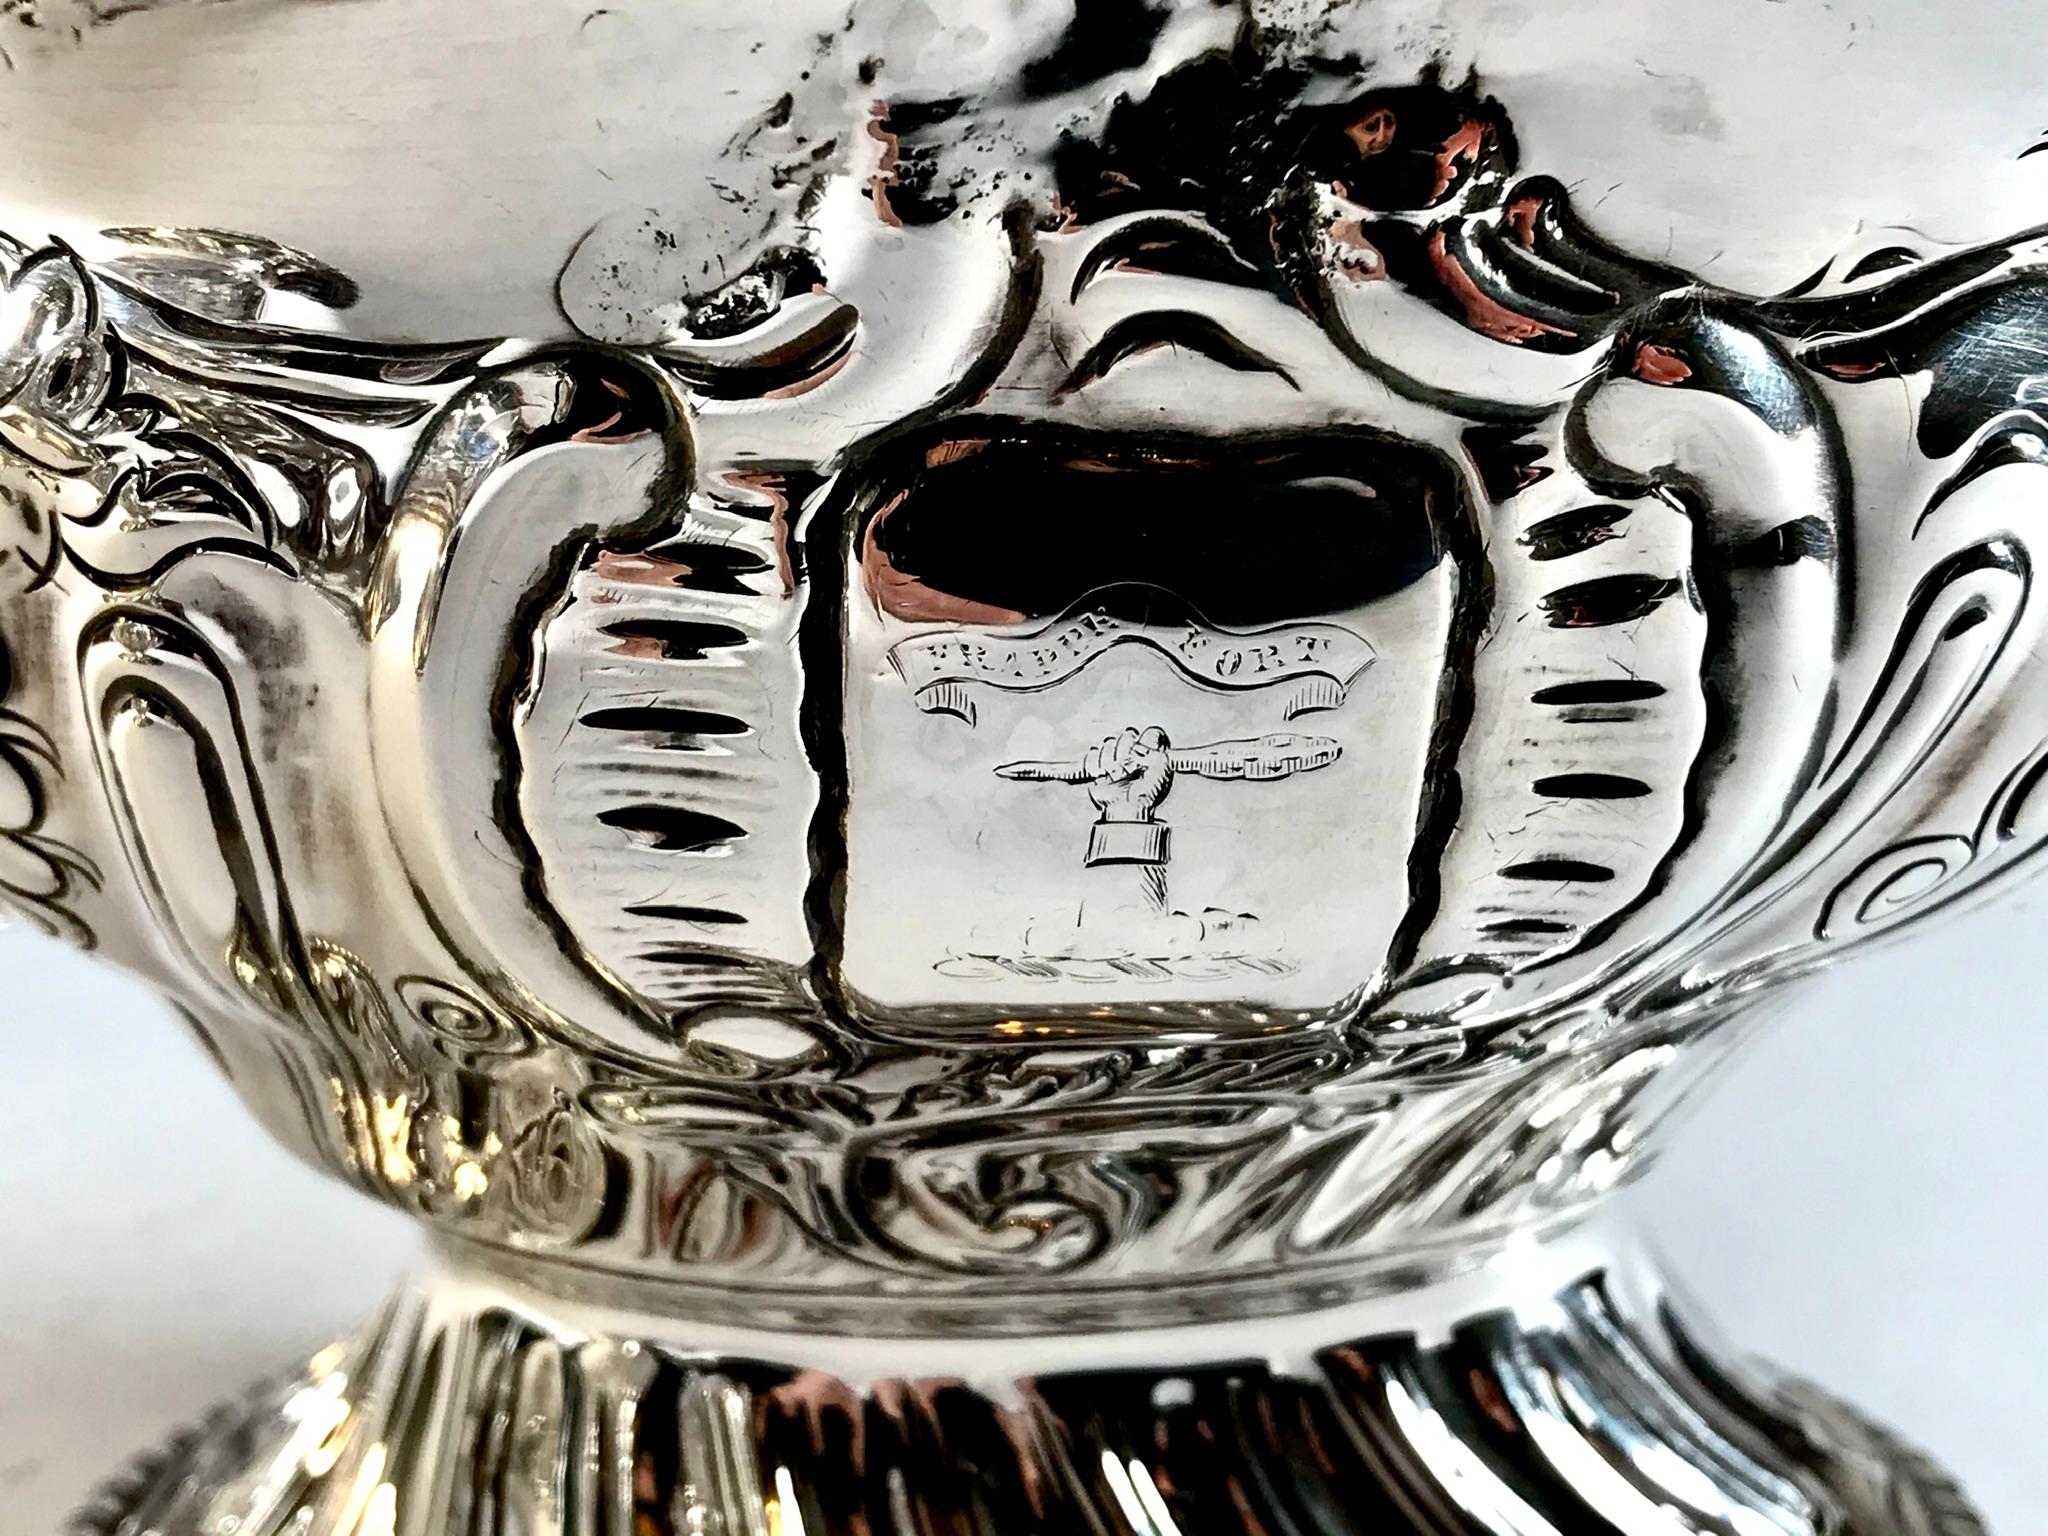 A magnificent Centre piece comprising of 3 solid silver bowls richly decorated with grape vines and grapes.
there is a cartouche to the front of all 3 pieces with an Armorial Crest 